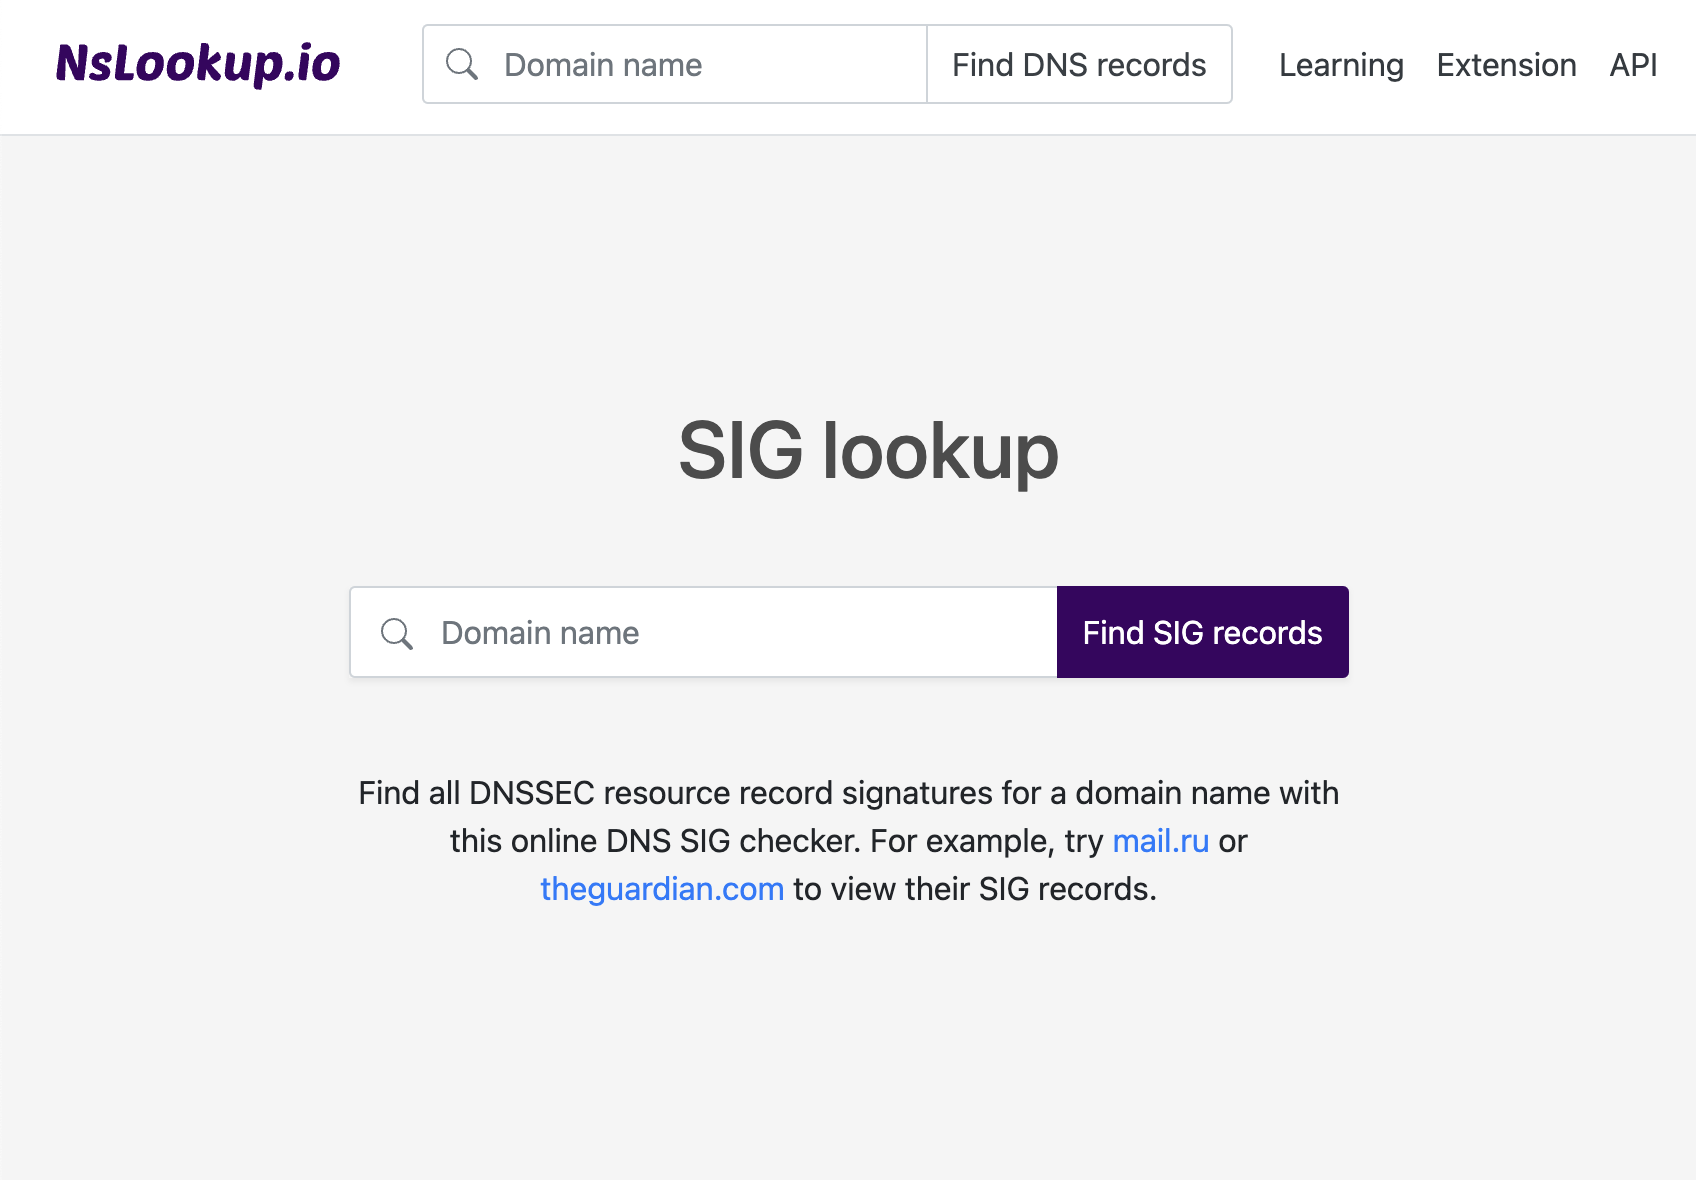 Open the SIG lookup tool